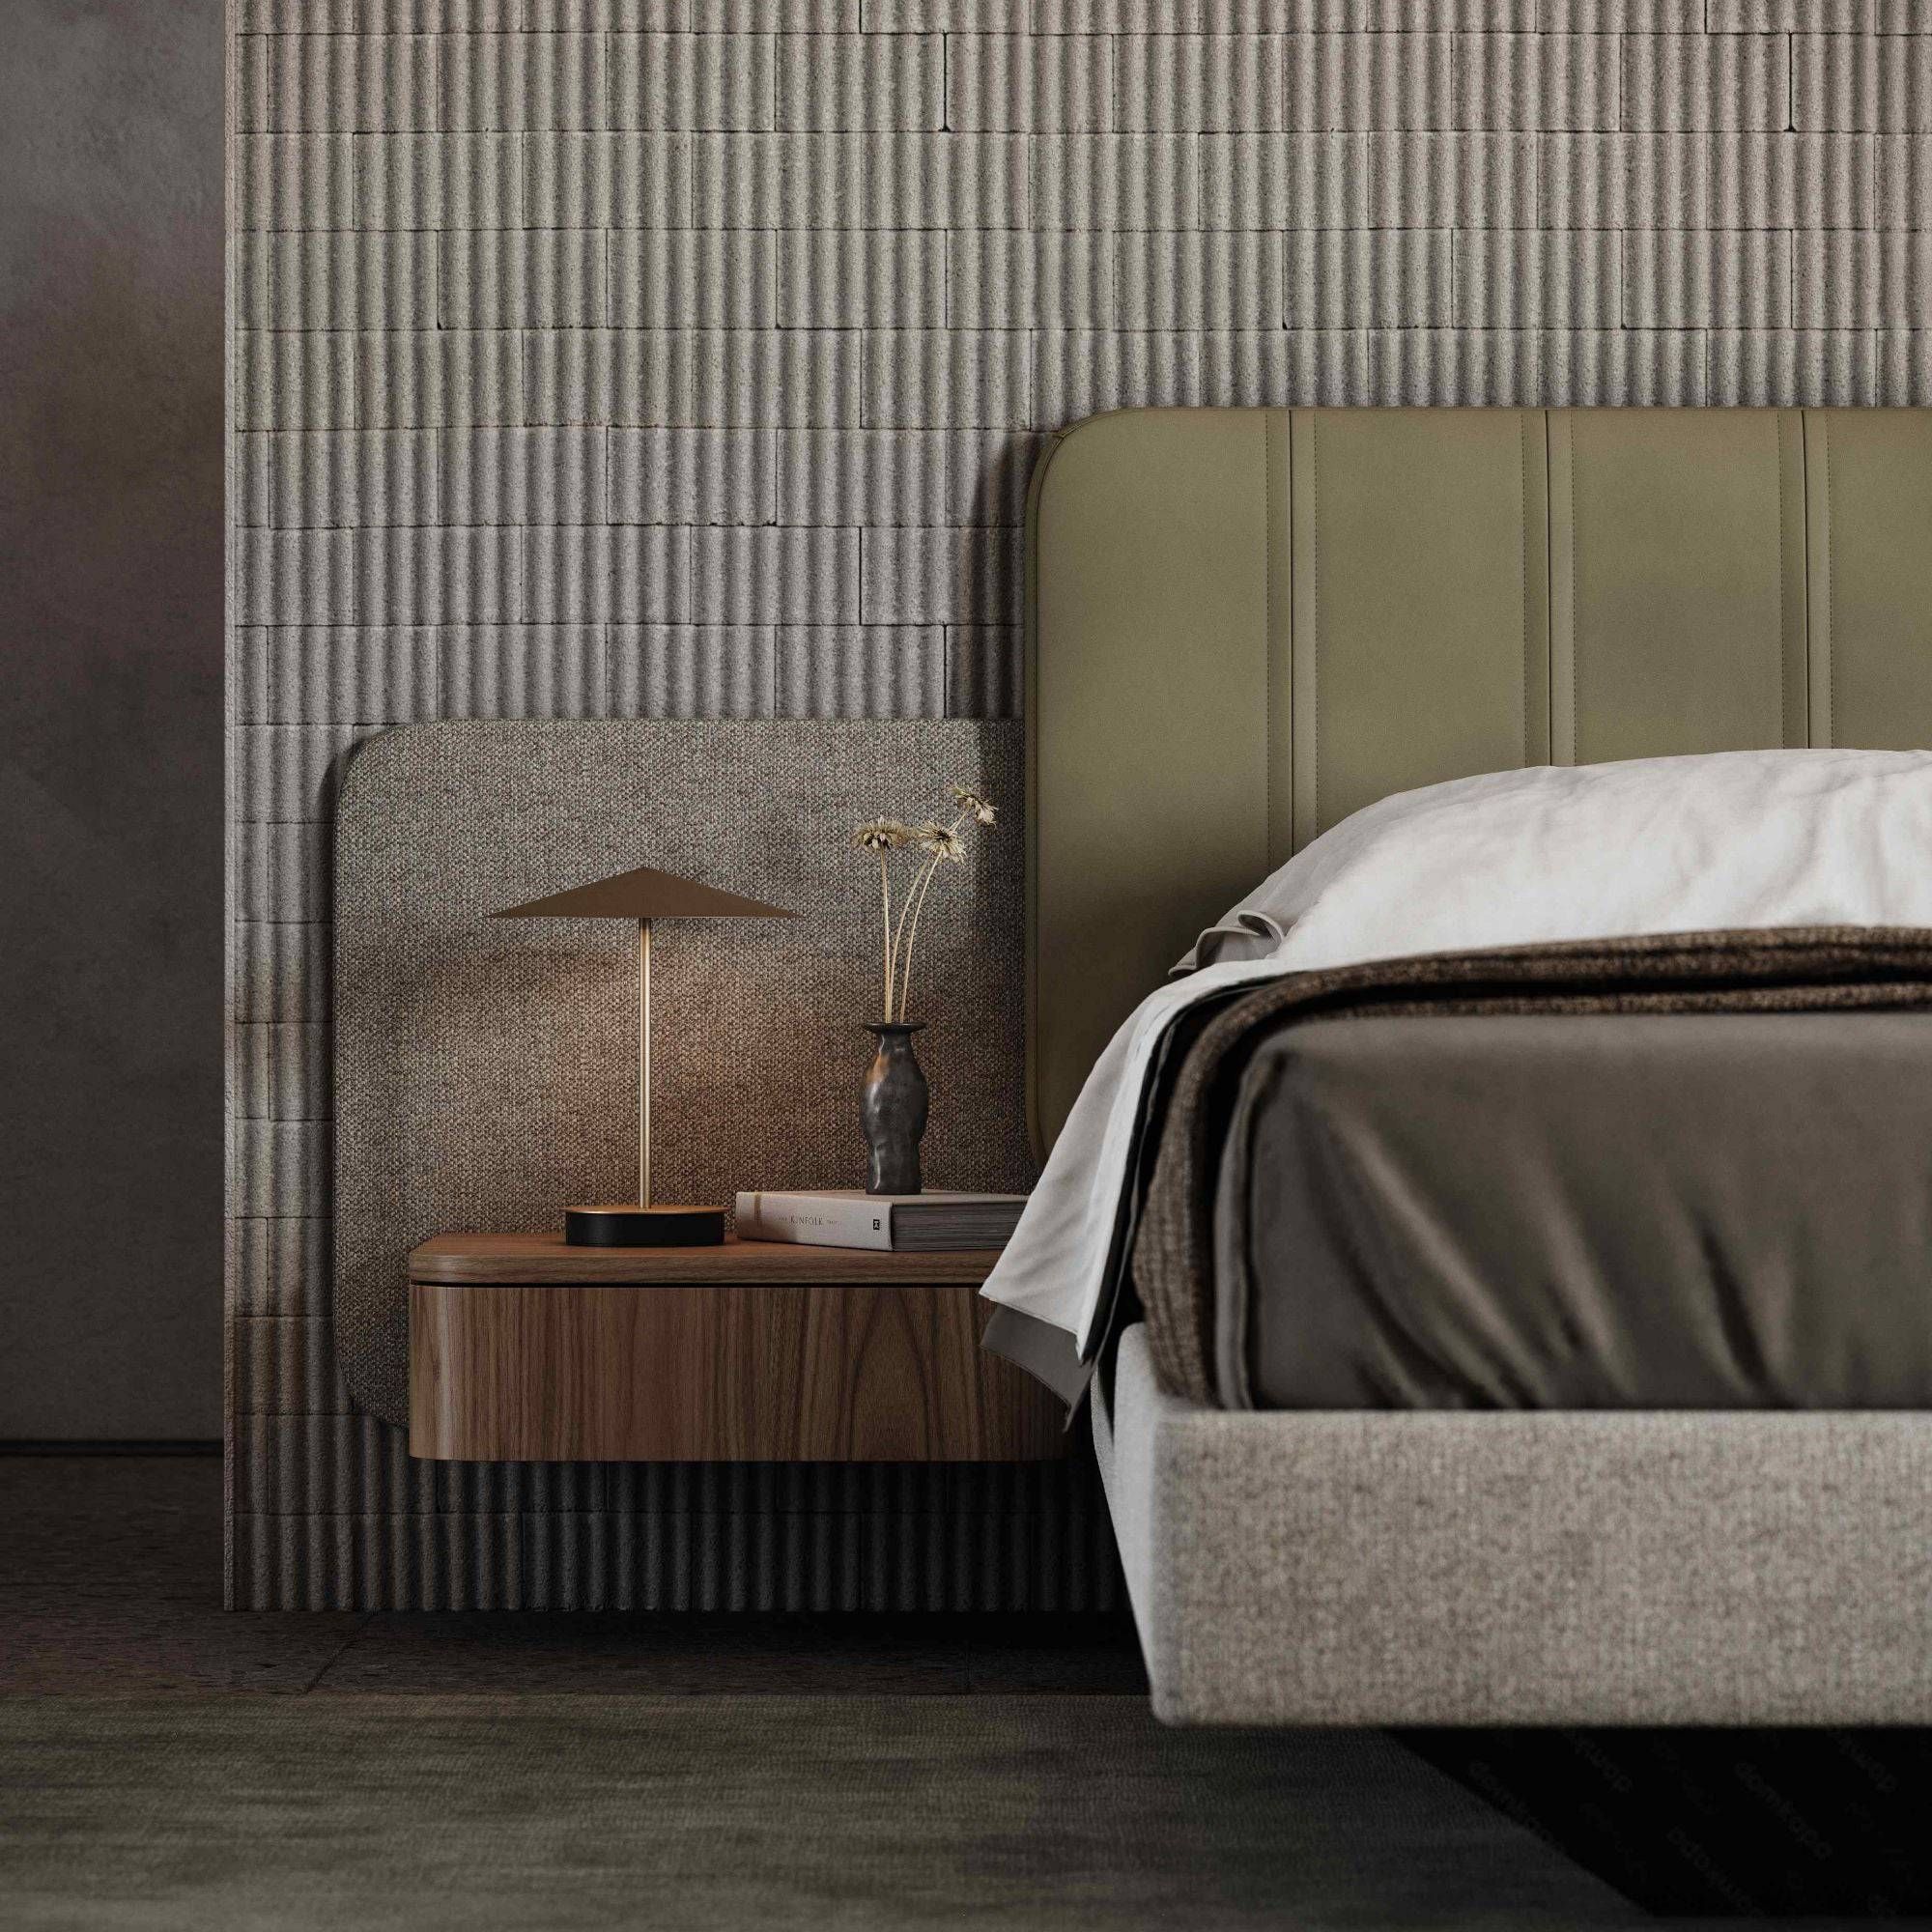 Double Headboards Beds Upgrade Your Bedroom with a Stylish Two-Headed Bed Option